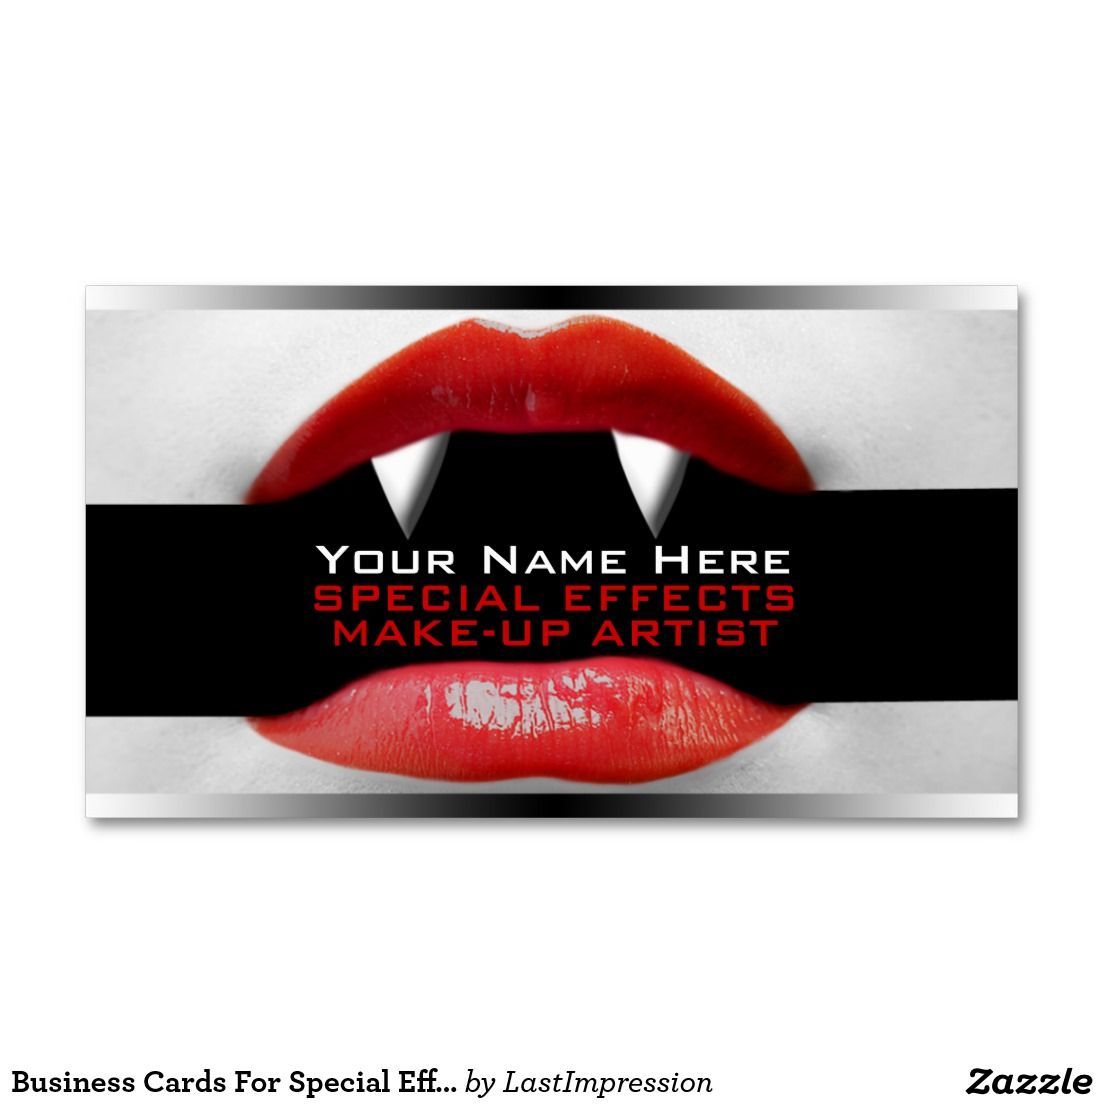 Business Cards For Special Effects MakeUp Artists | Zazzle.com -   12 special effects makeup Logo ideas